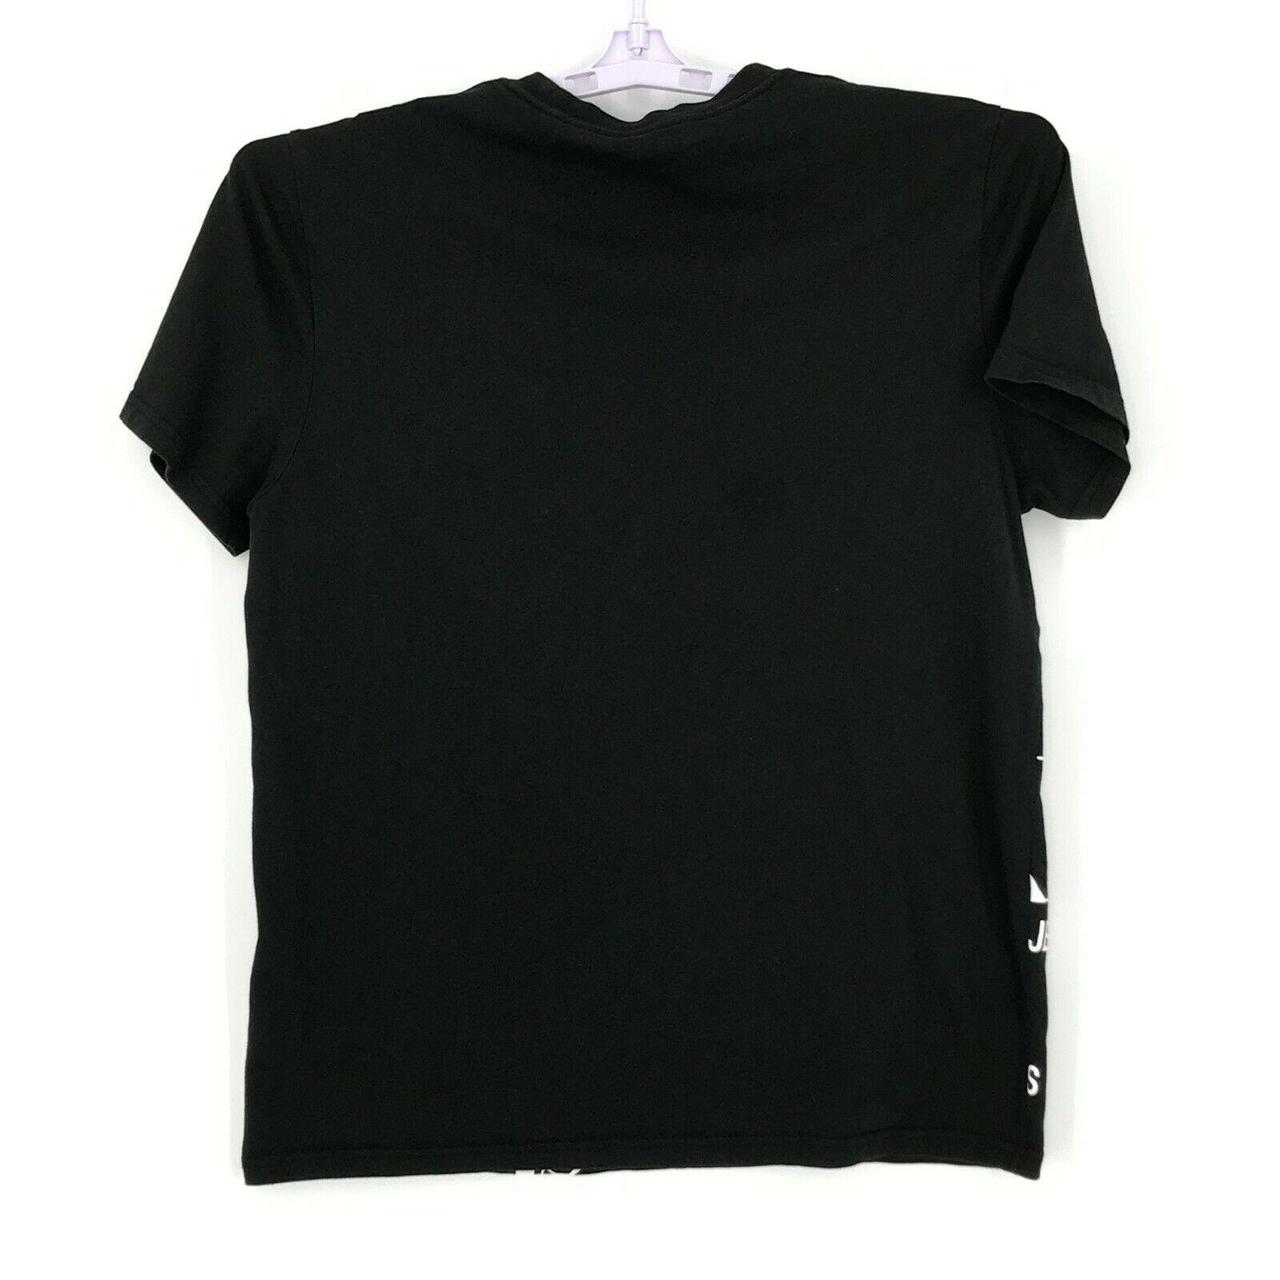 Product Image 3 - Calvin Klein Jeans T-Shirt Adult